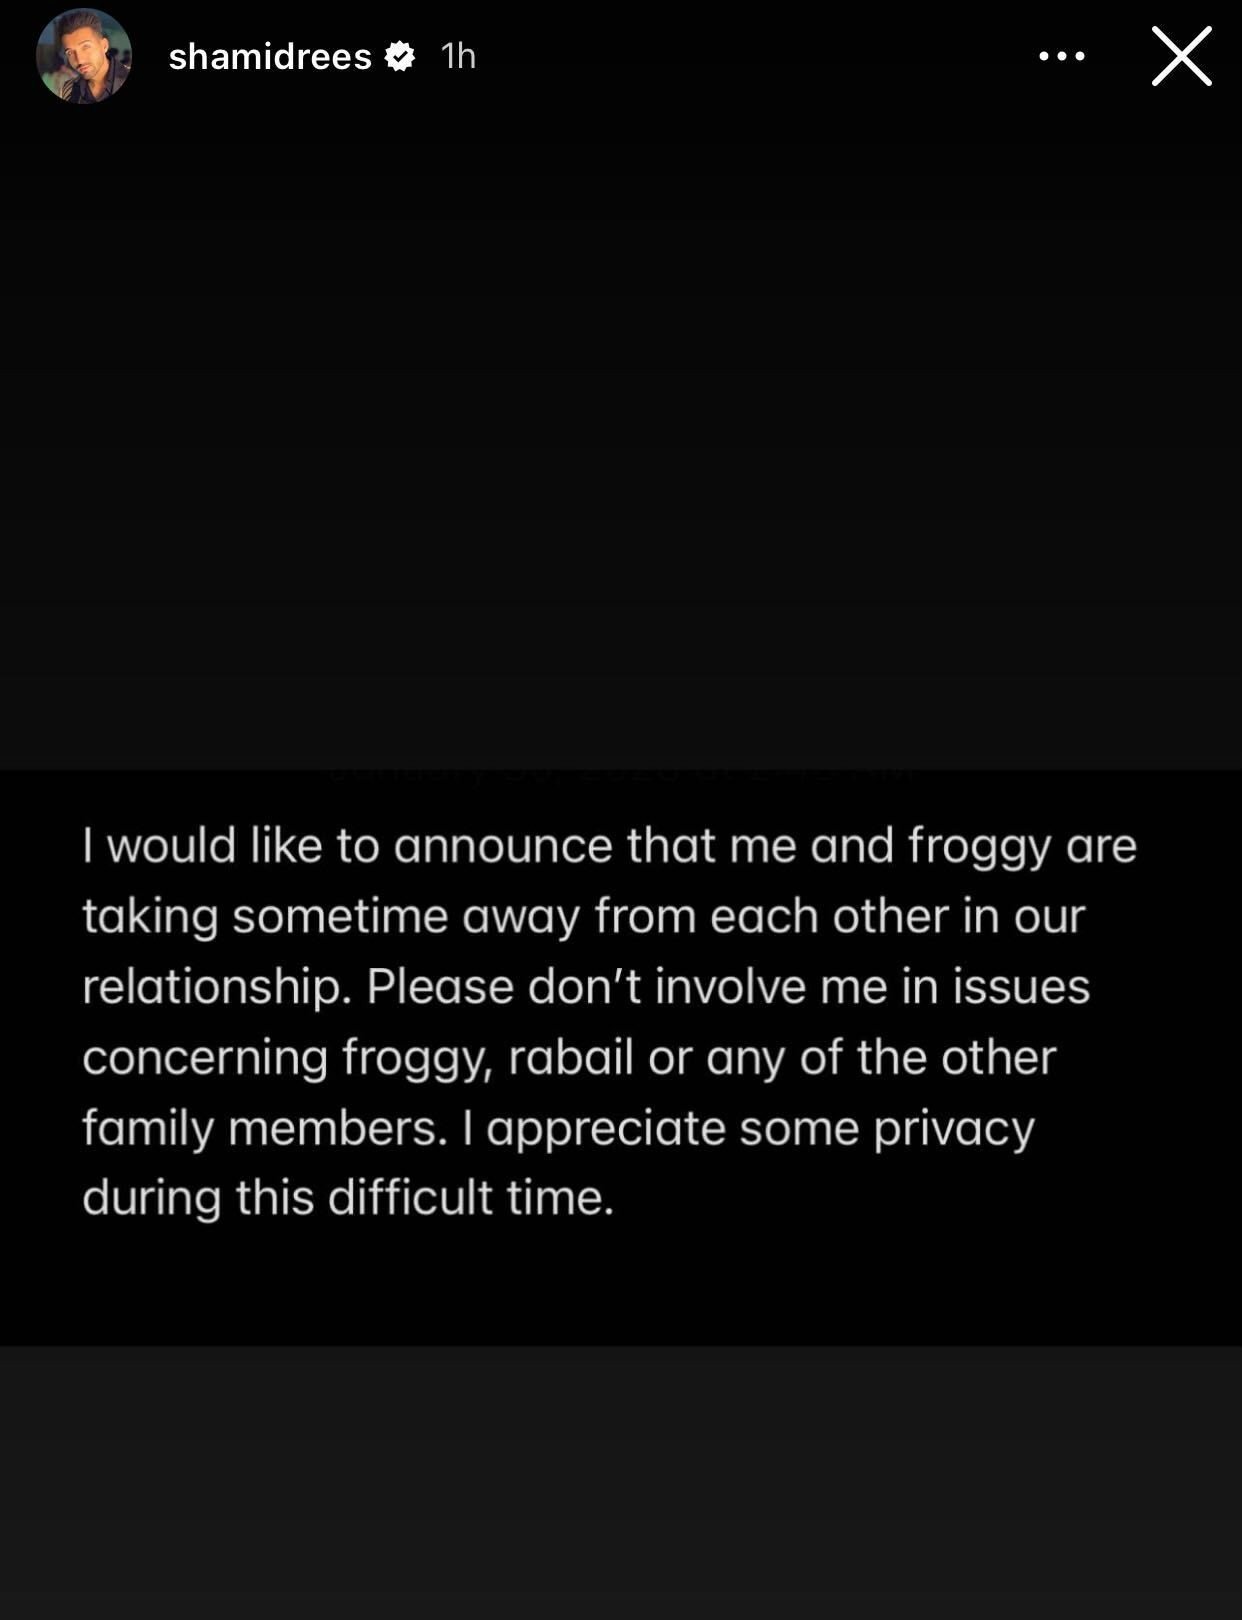 Sham Idrees, Froggy taking a break from their marriage 